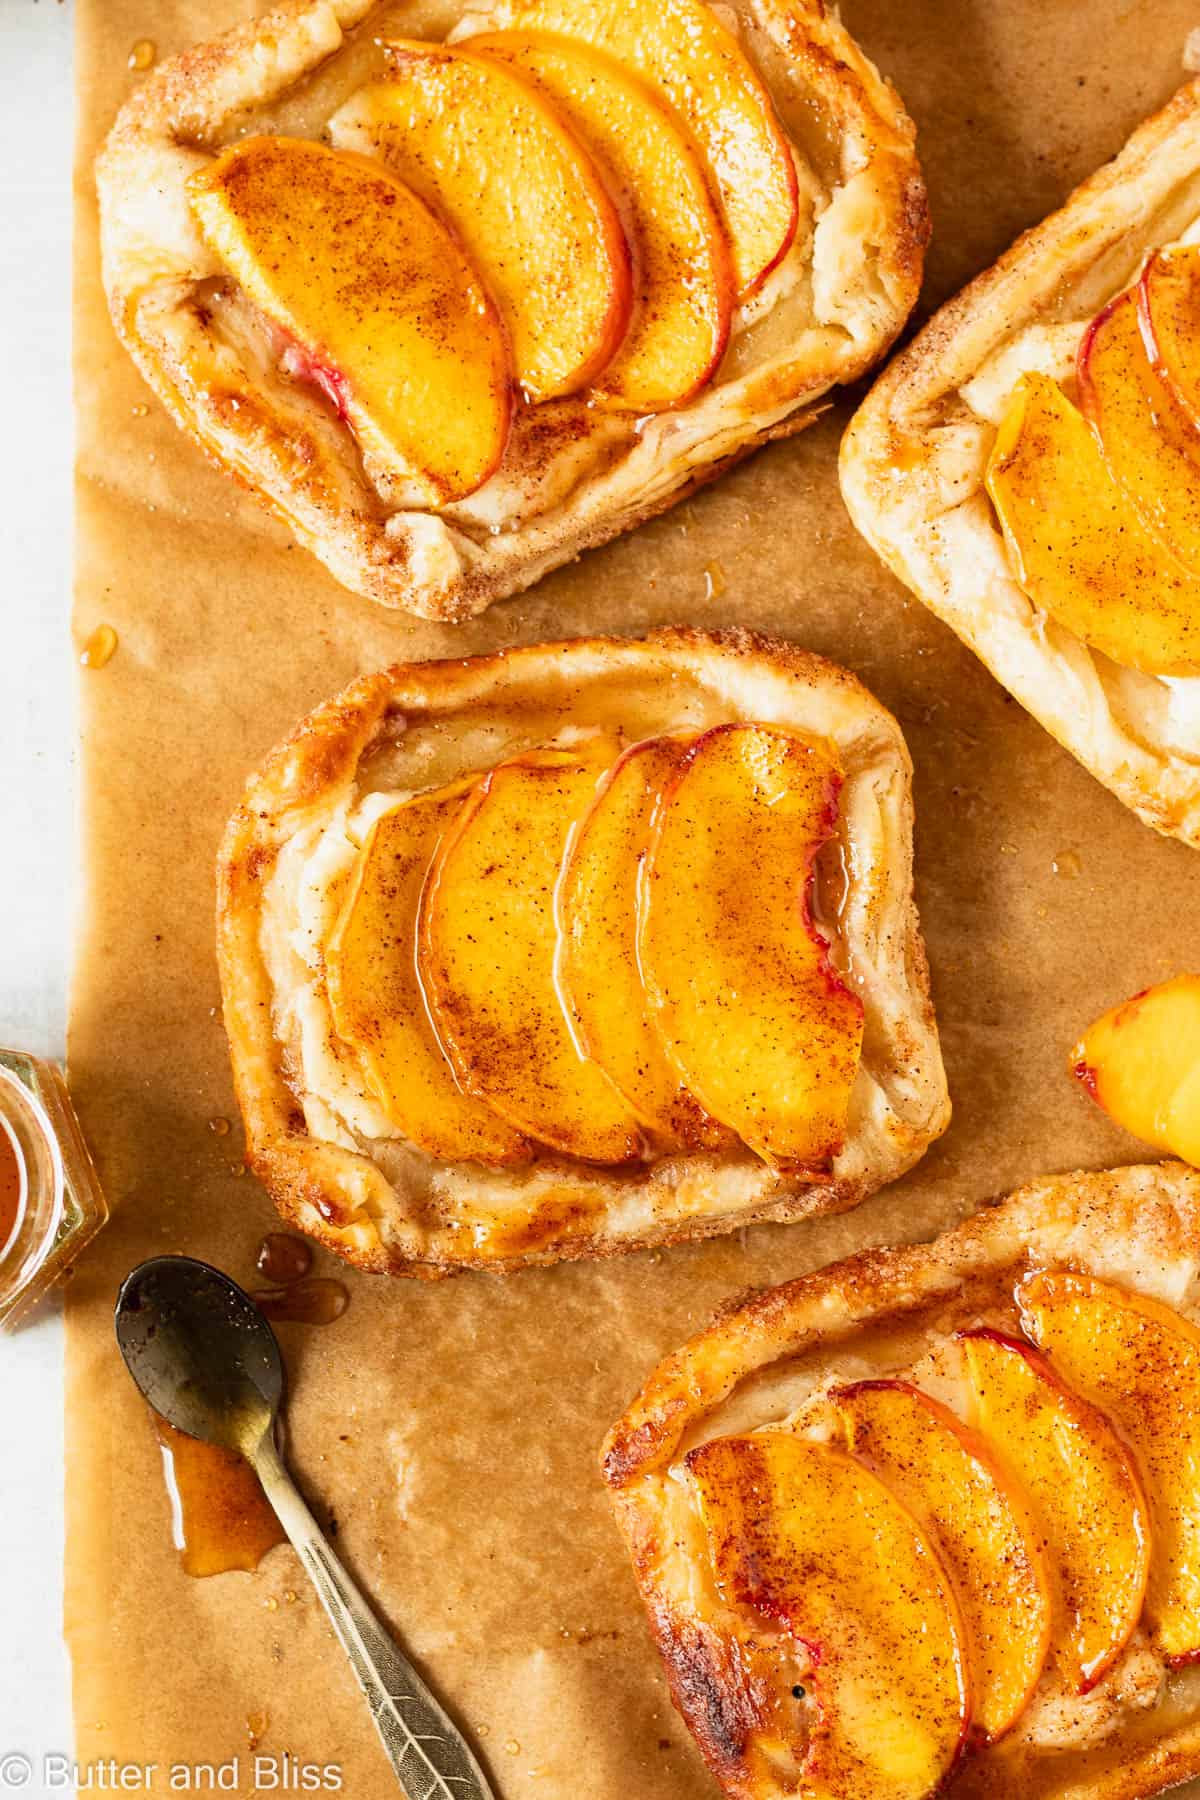 Freshly baked mini peach and cream cheese tarts on parchment paper with honey drizzle.